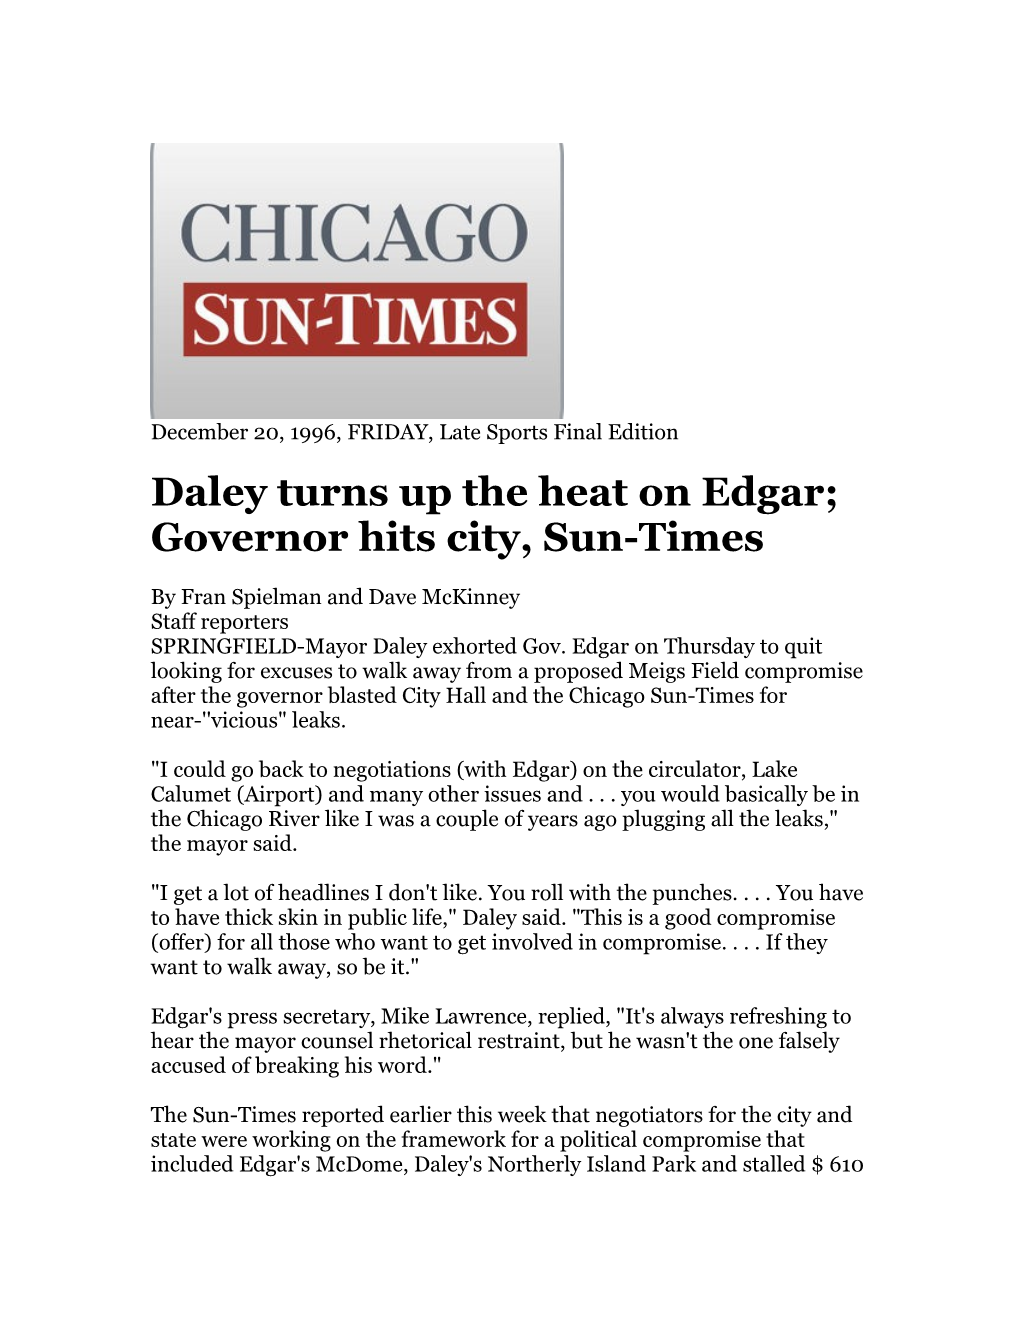 Daley Turns up the Heat on Edgar;